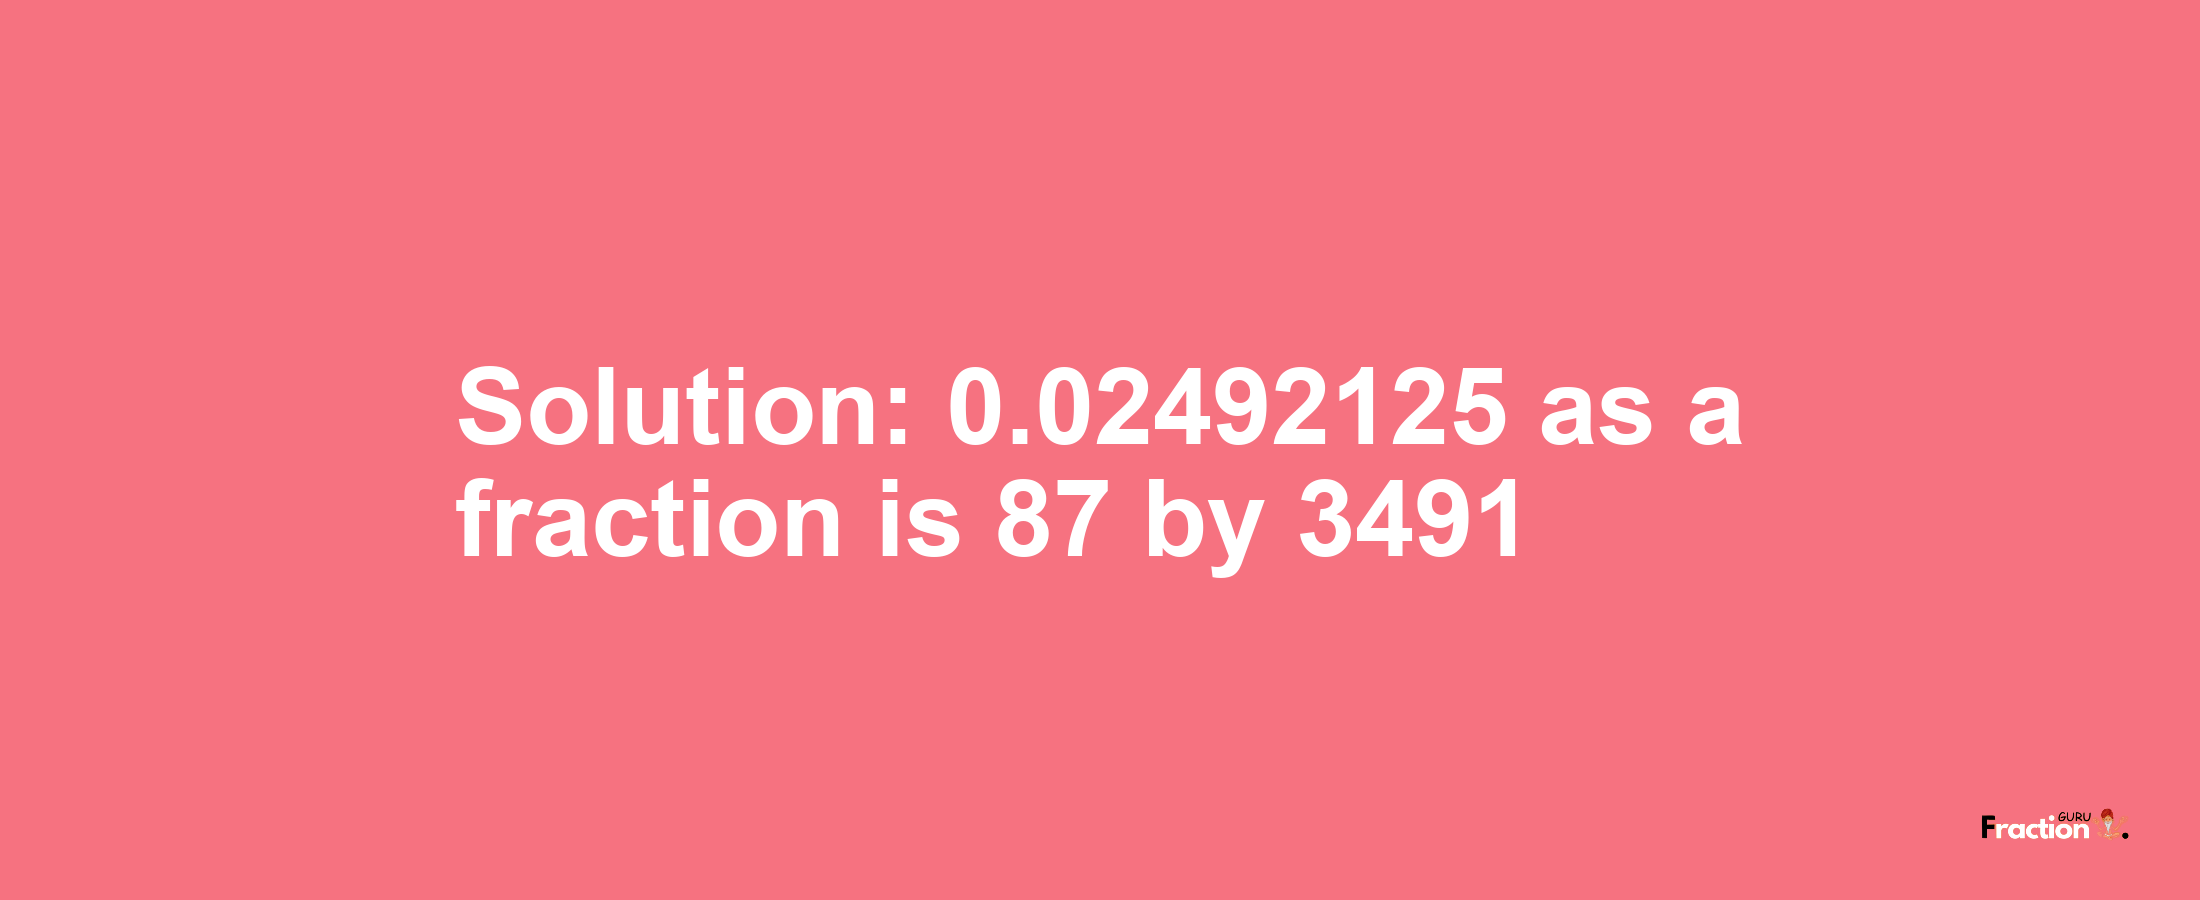 Solution:0.02492125 as a fraction is 87/3491